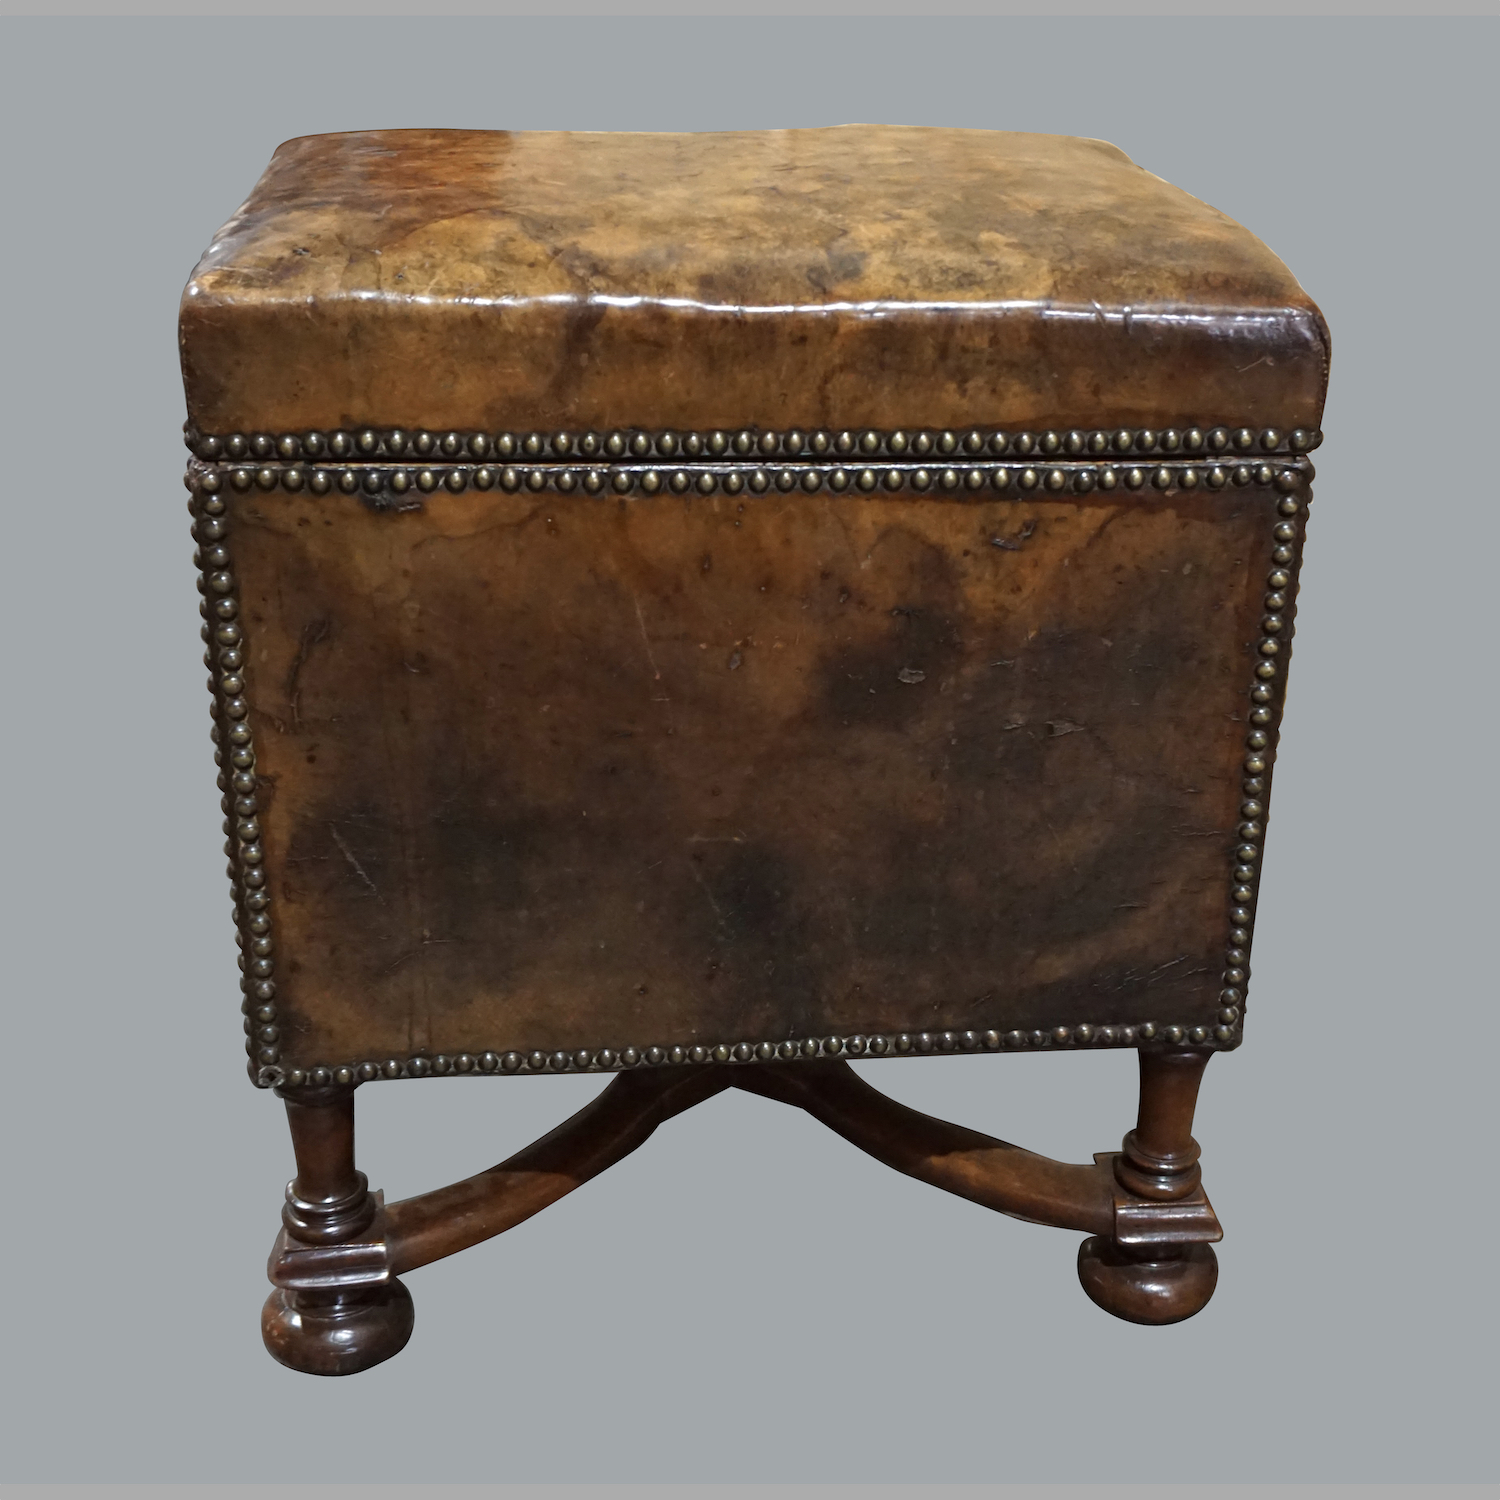 william-mary-style-leather-upholstered-small-footstool-with-storage-c822-9